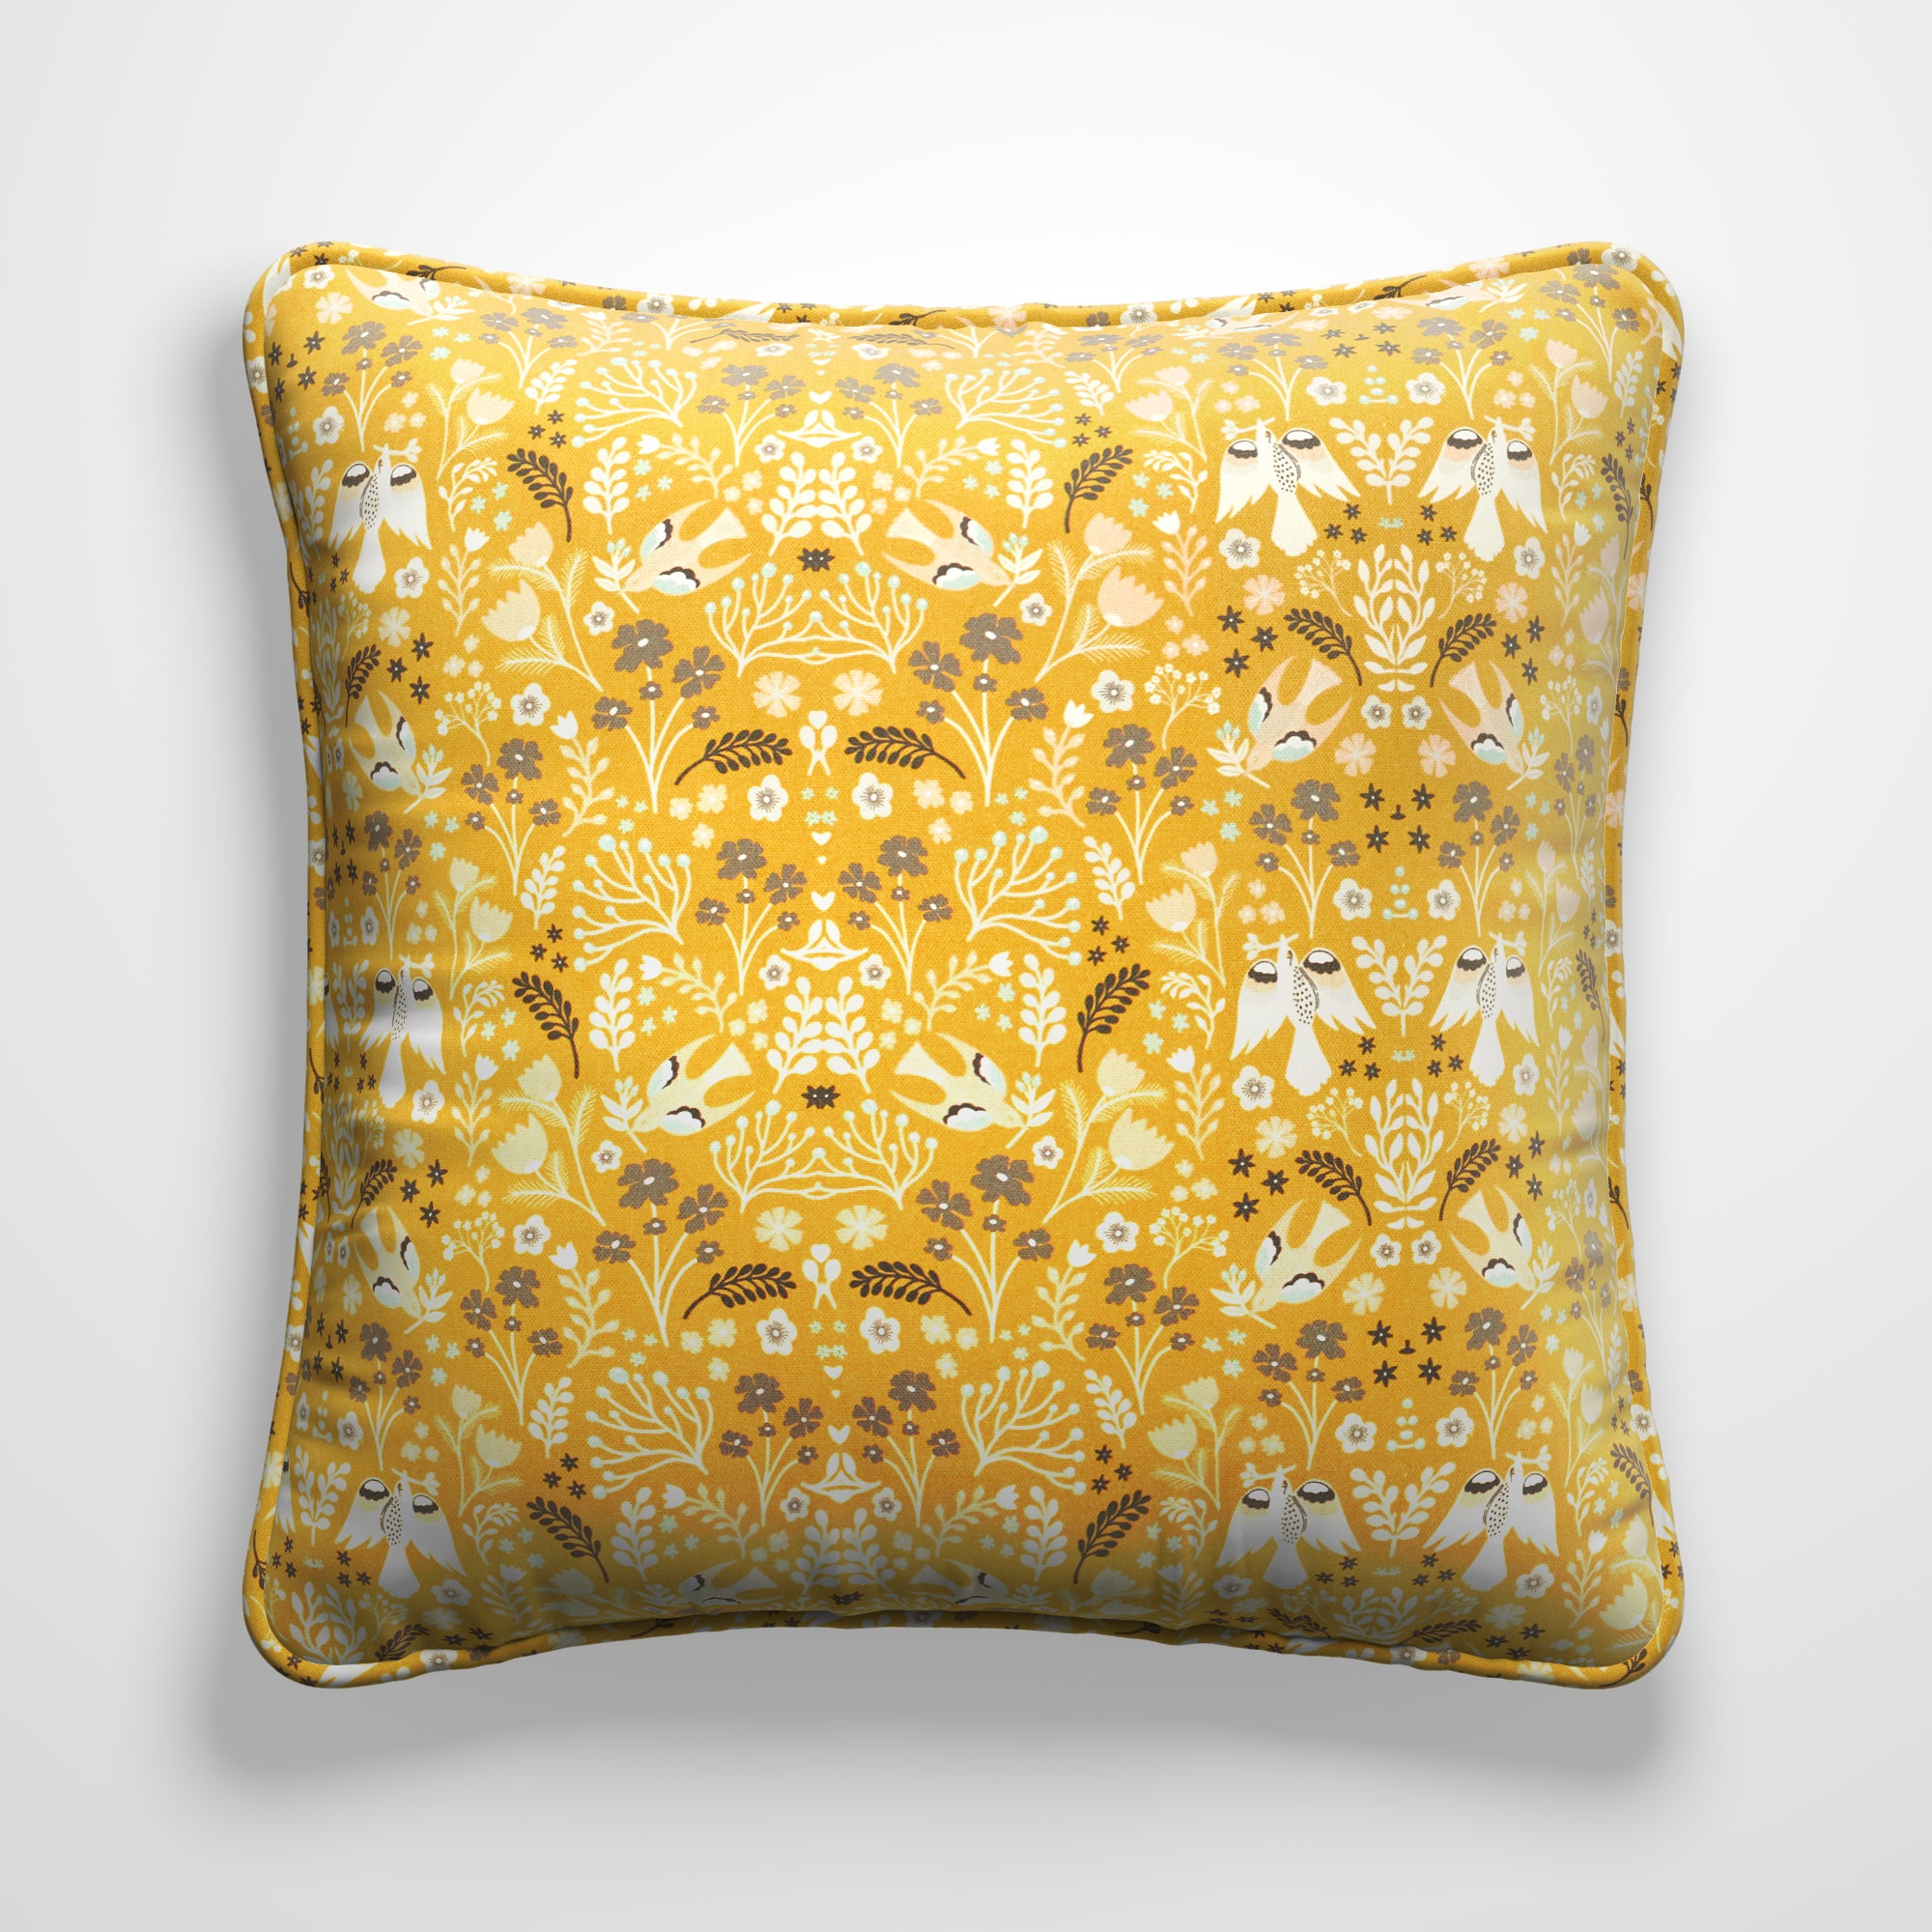 Folklore Made to Order Cushion Cover Folklore Ochre